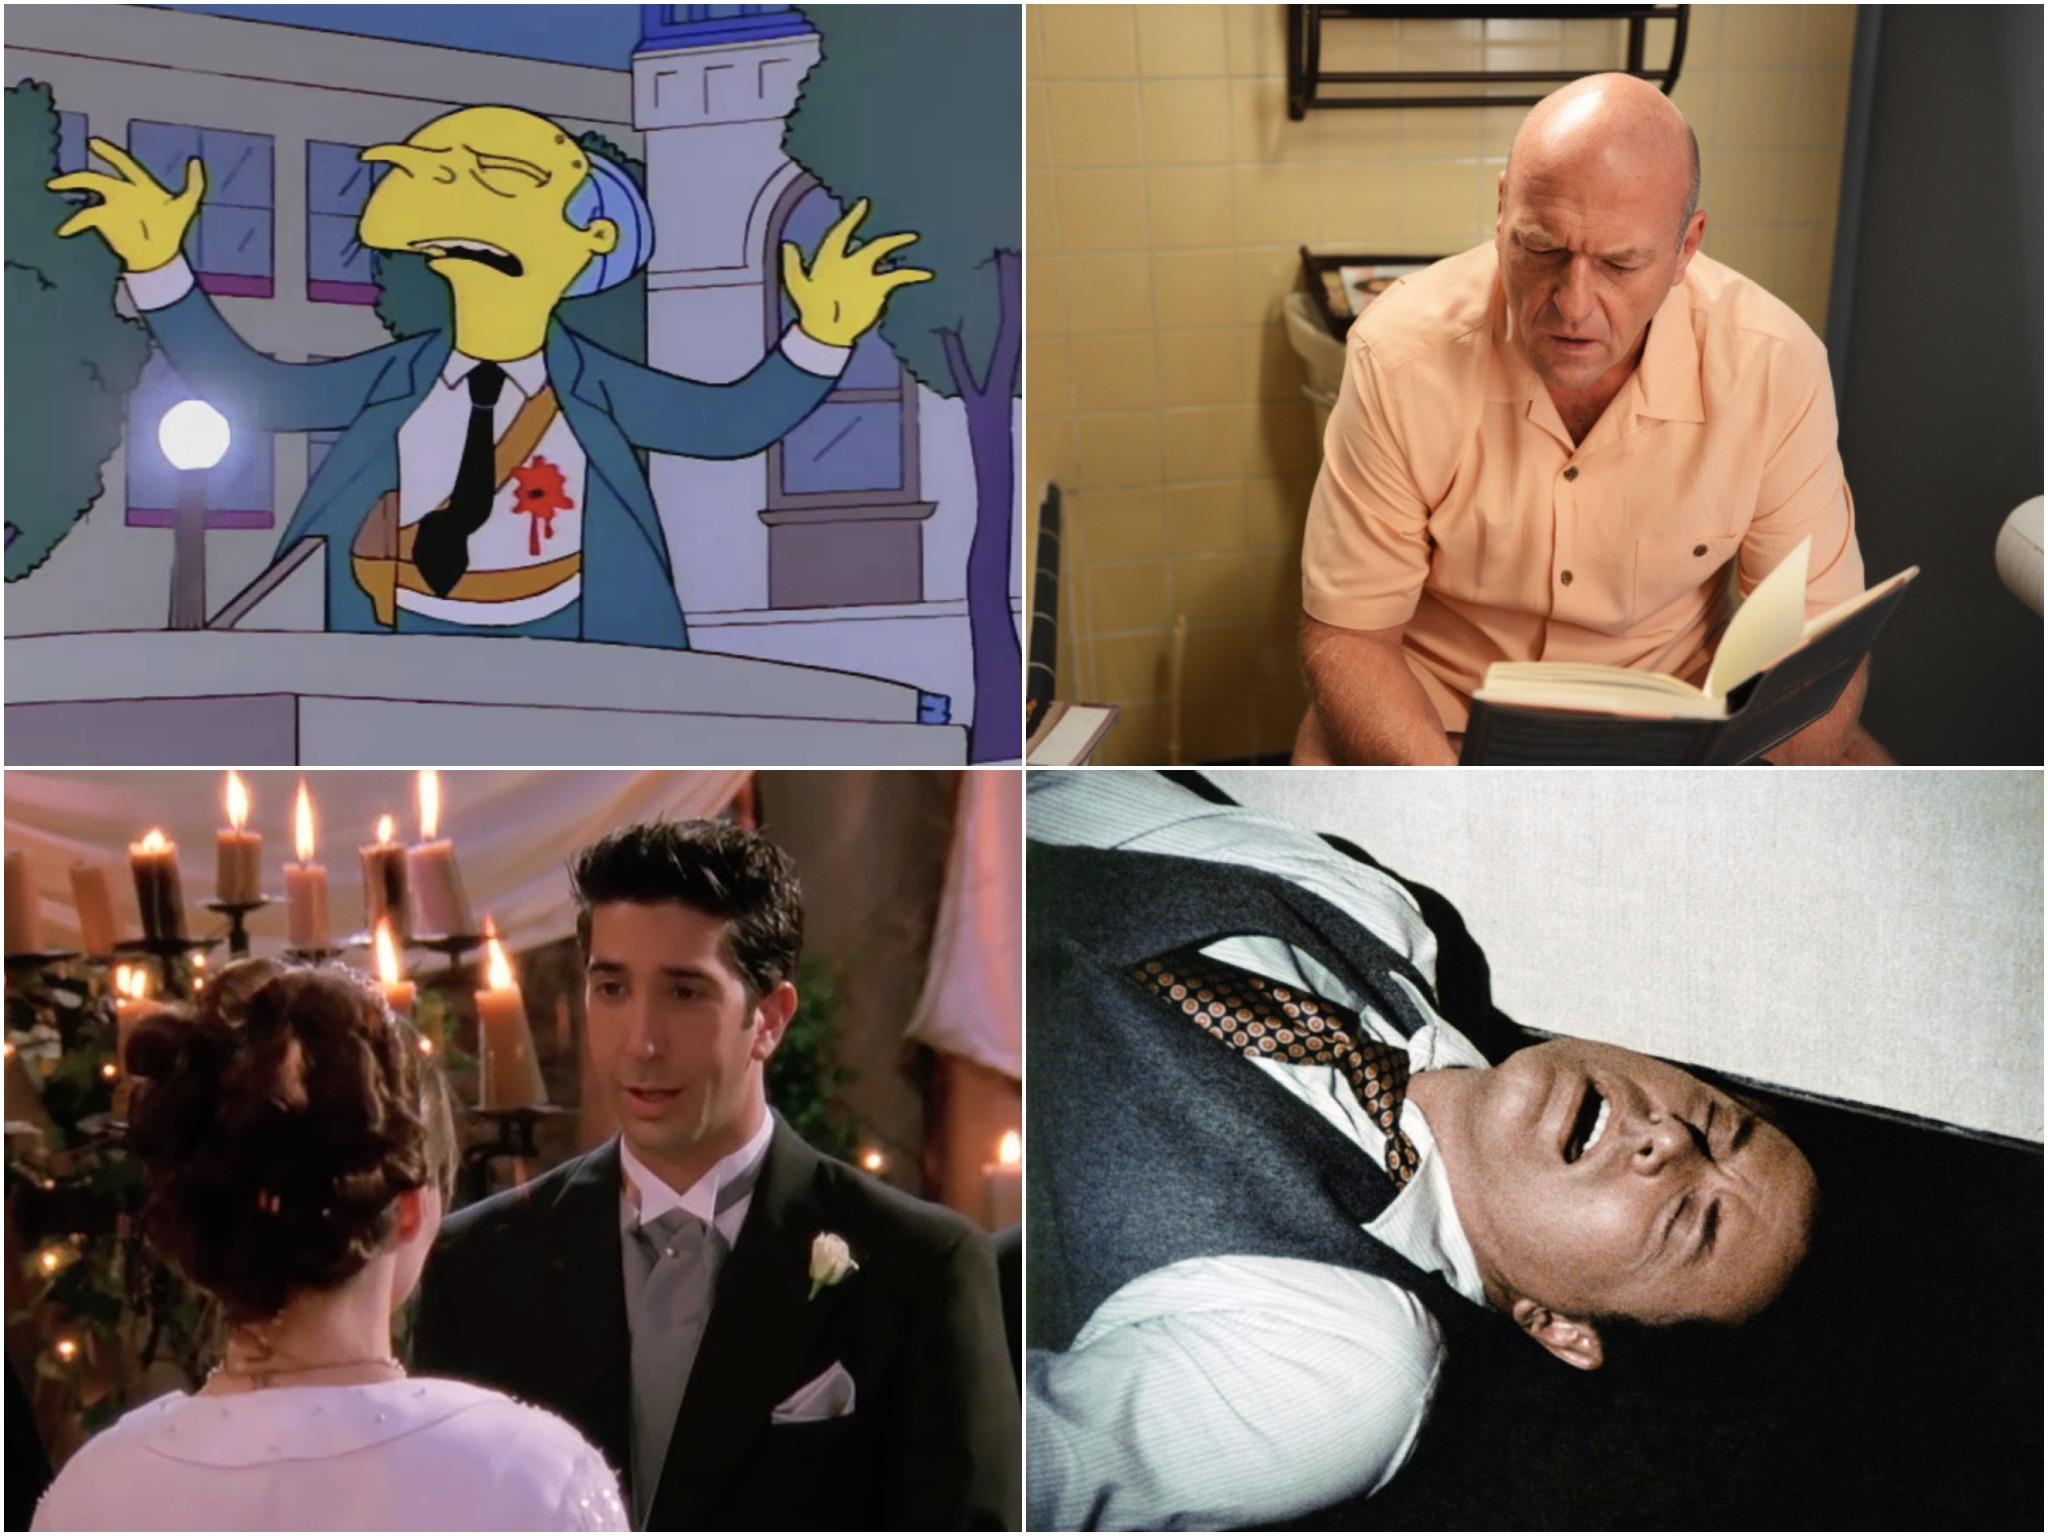 Clockwise from top right: The Simpsons, Breaking Bad, Dallas and Friends